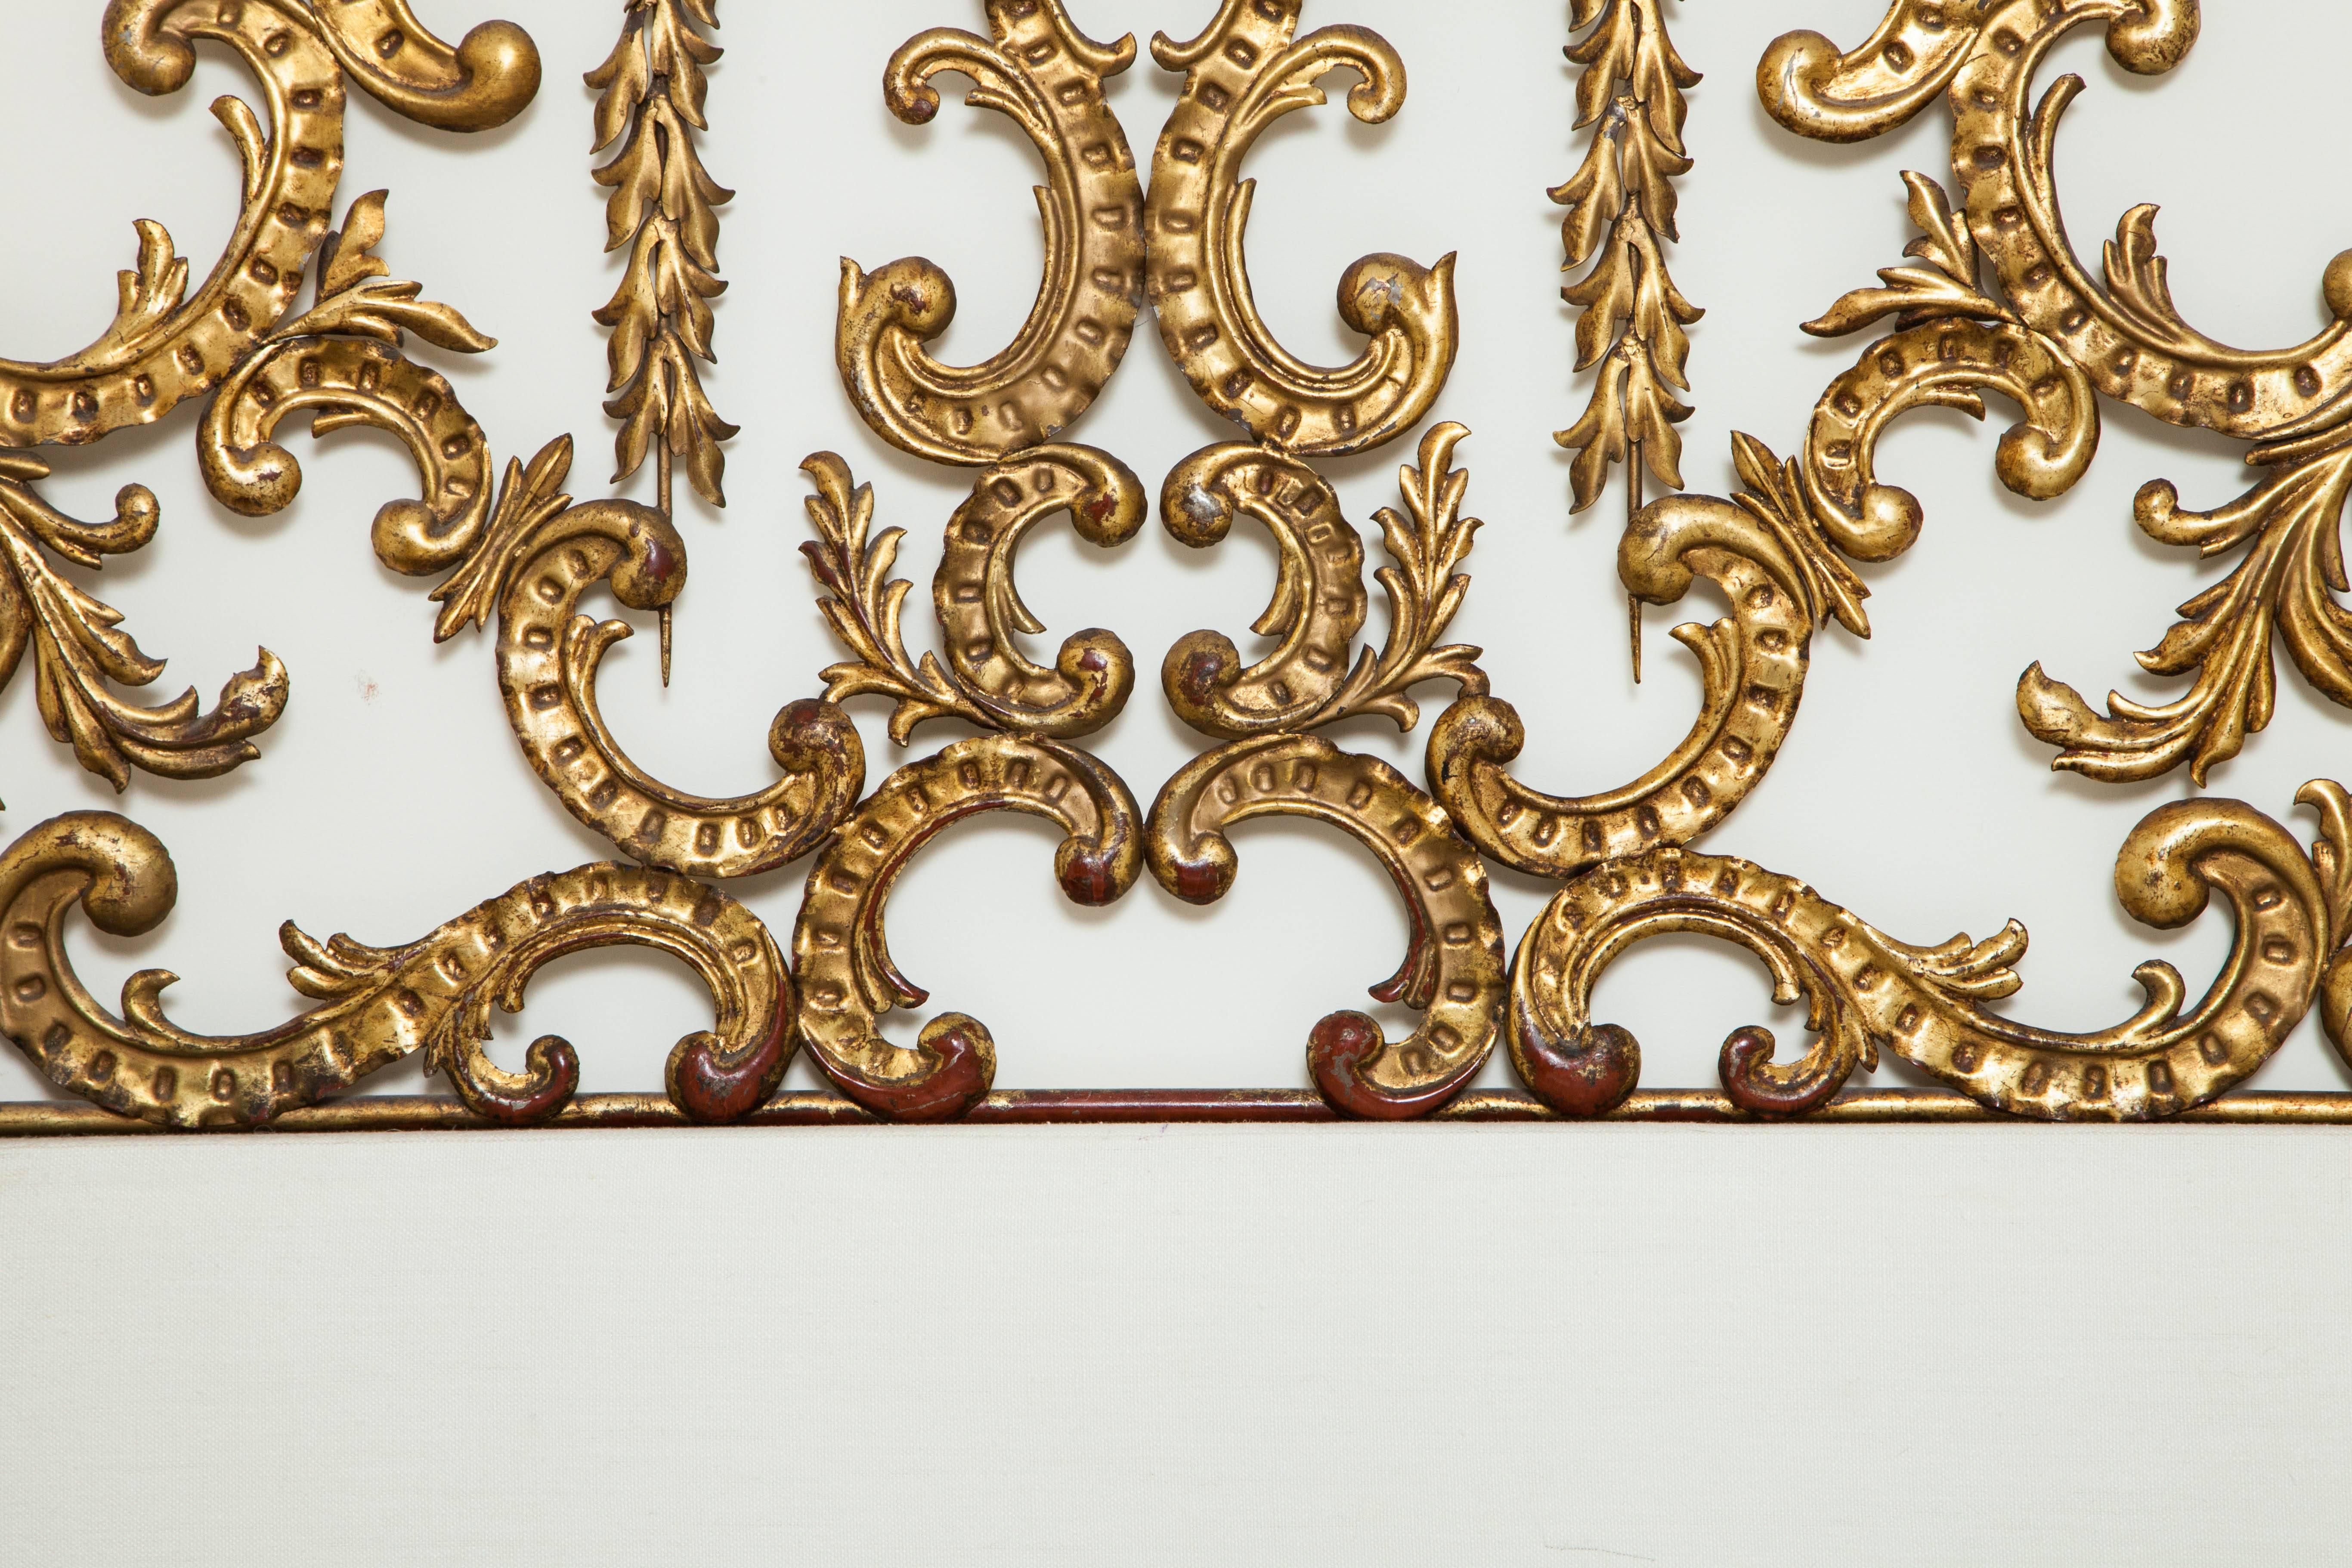 Ornate gilt king headboard, custom-made from a pair of antique twin bed frames. Mounts to the wall around a white fabric board (included).